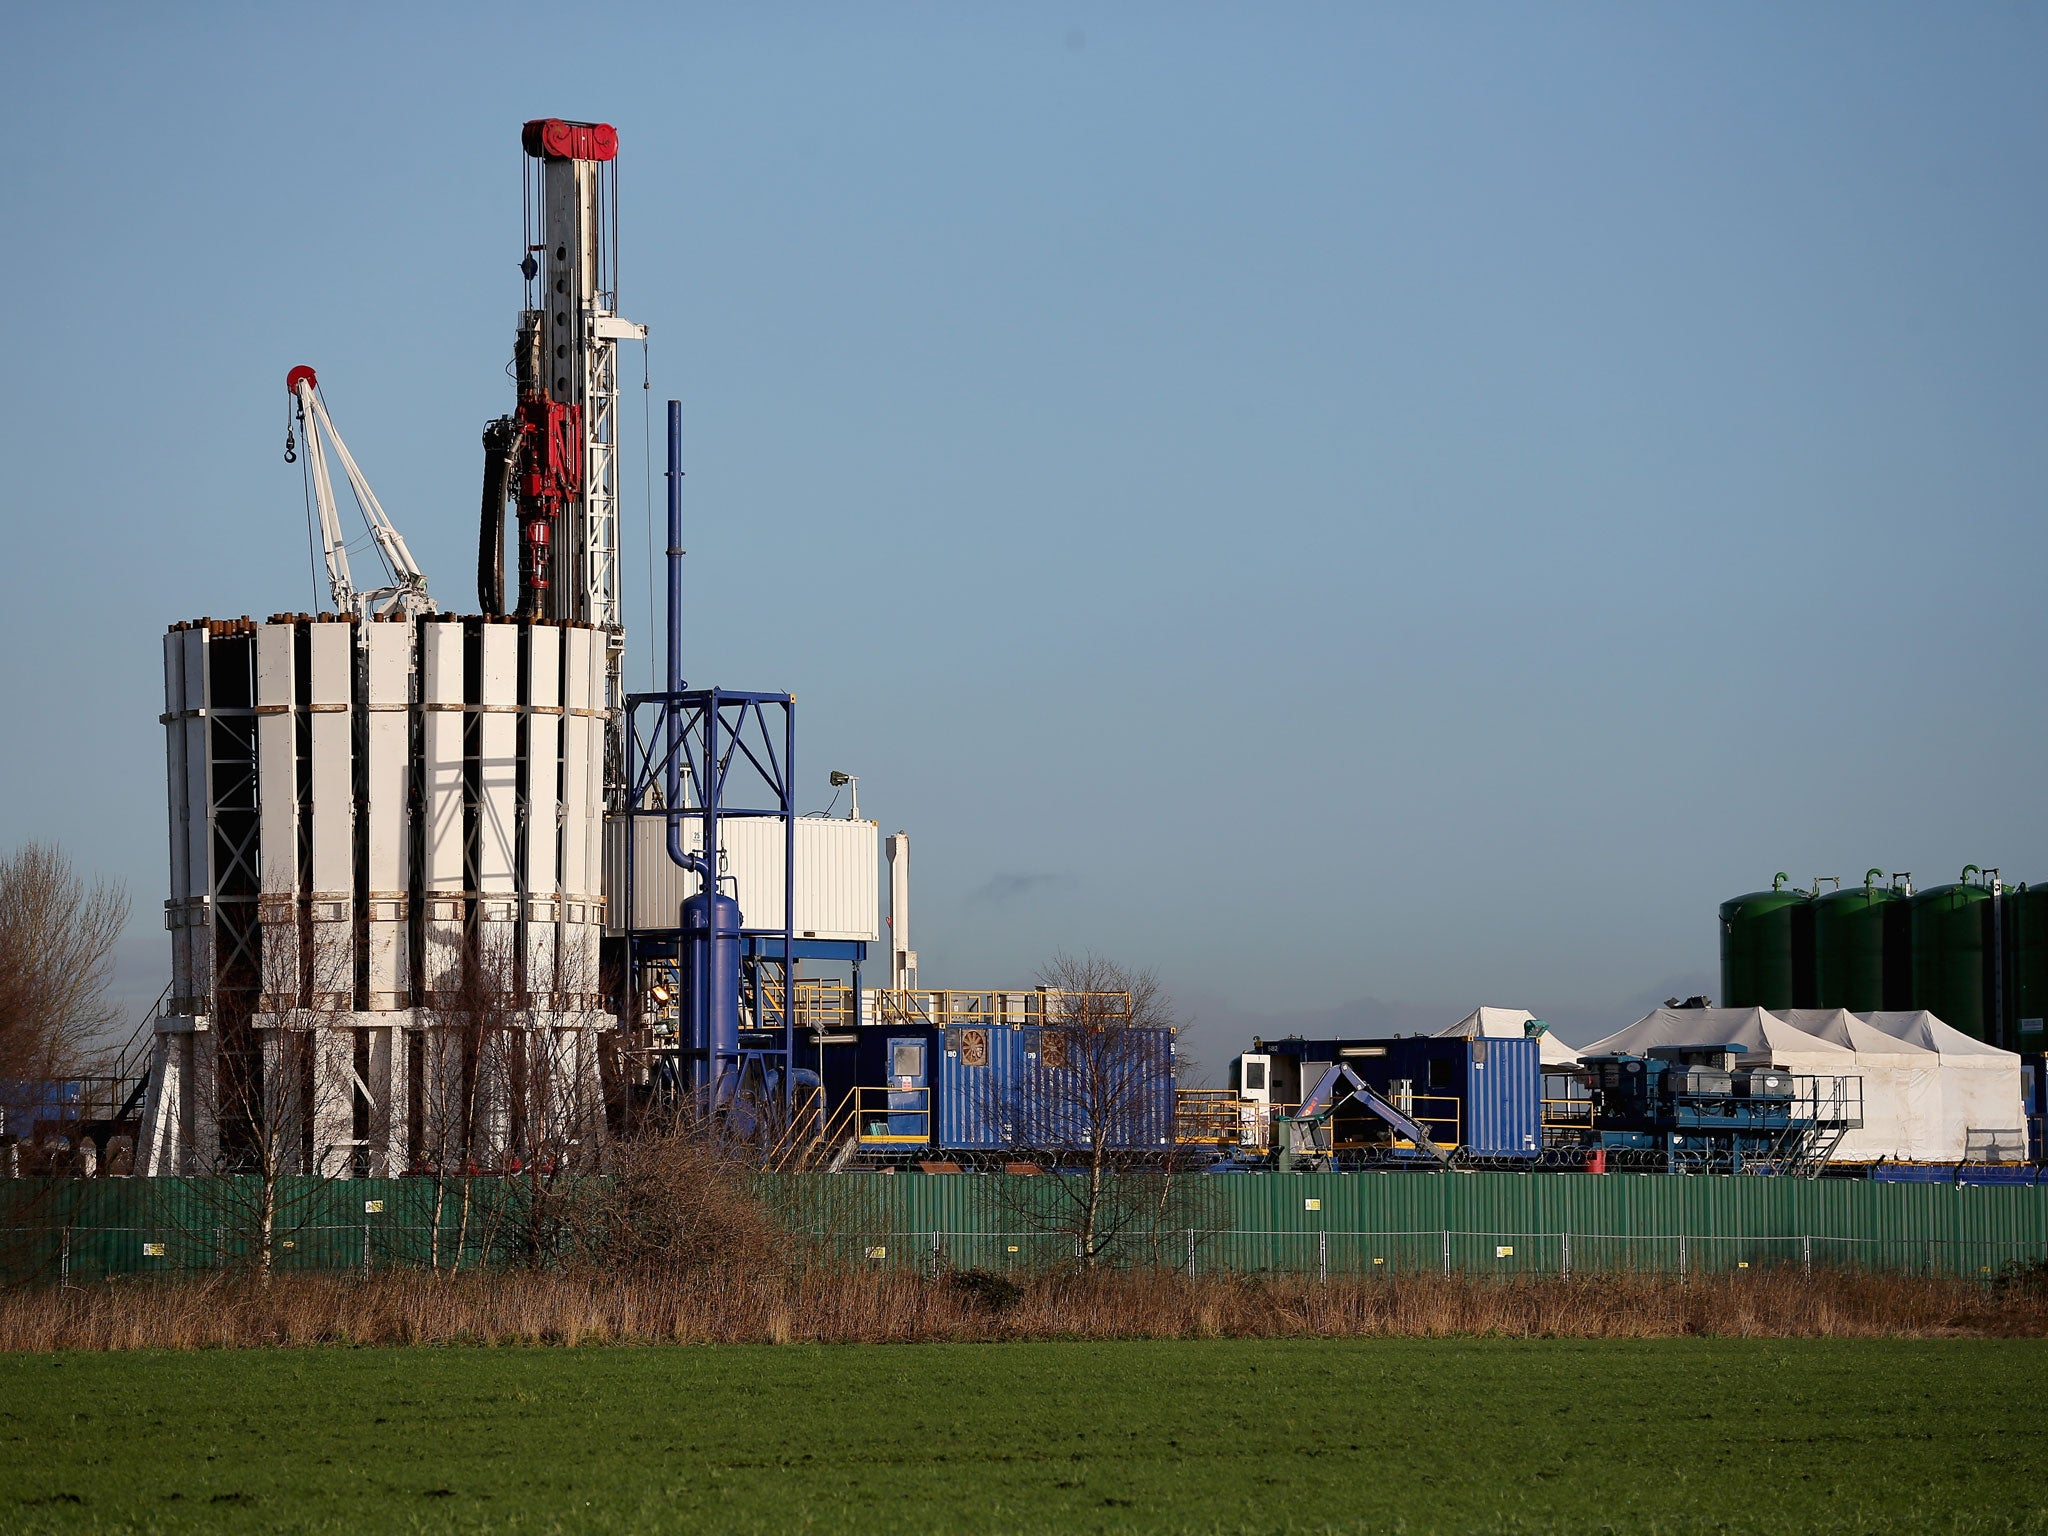 Trespass laws are being examined to allow fracking under people's homes without prior consent